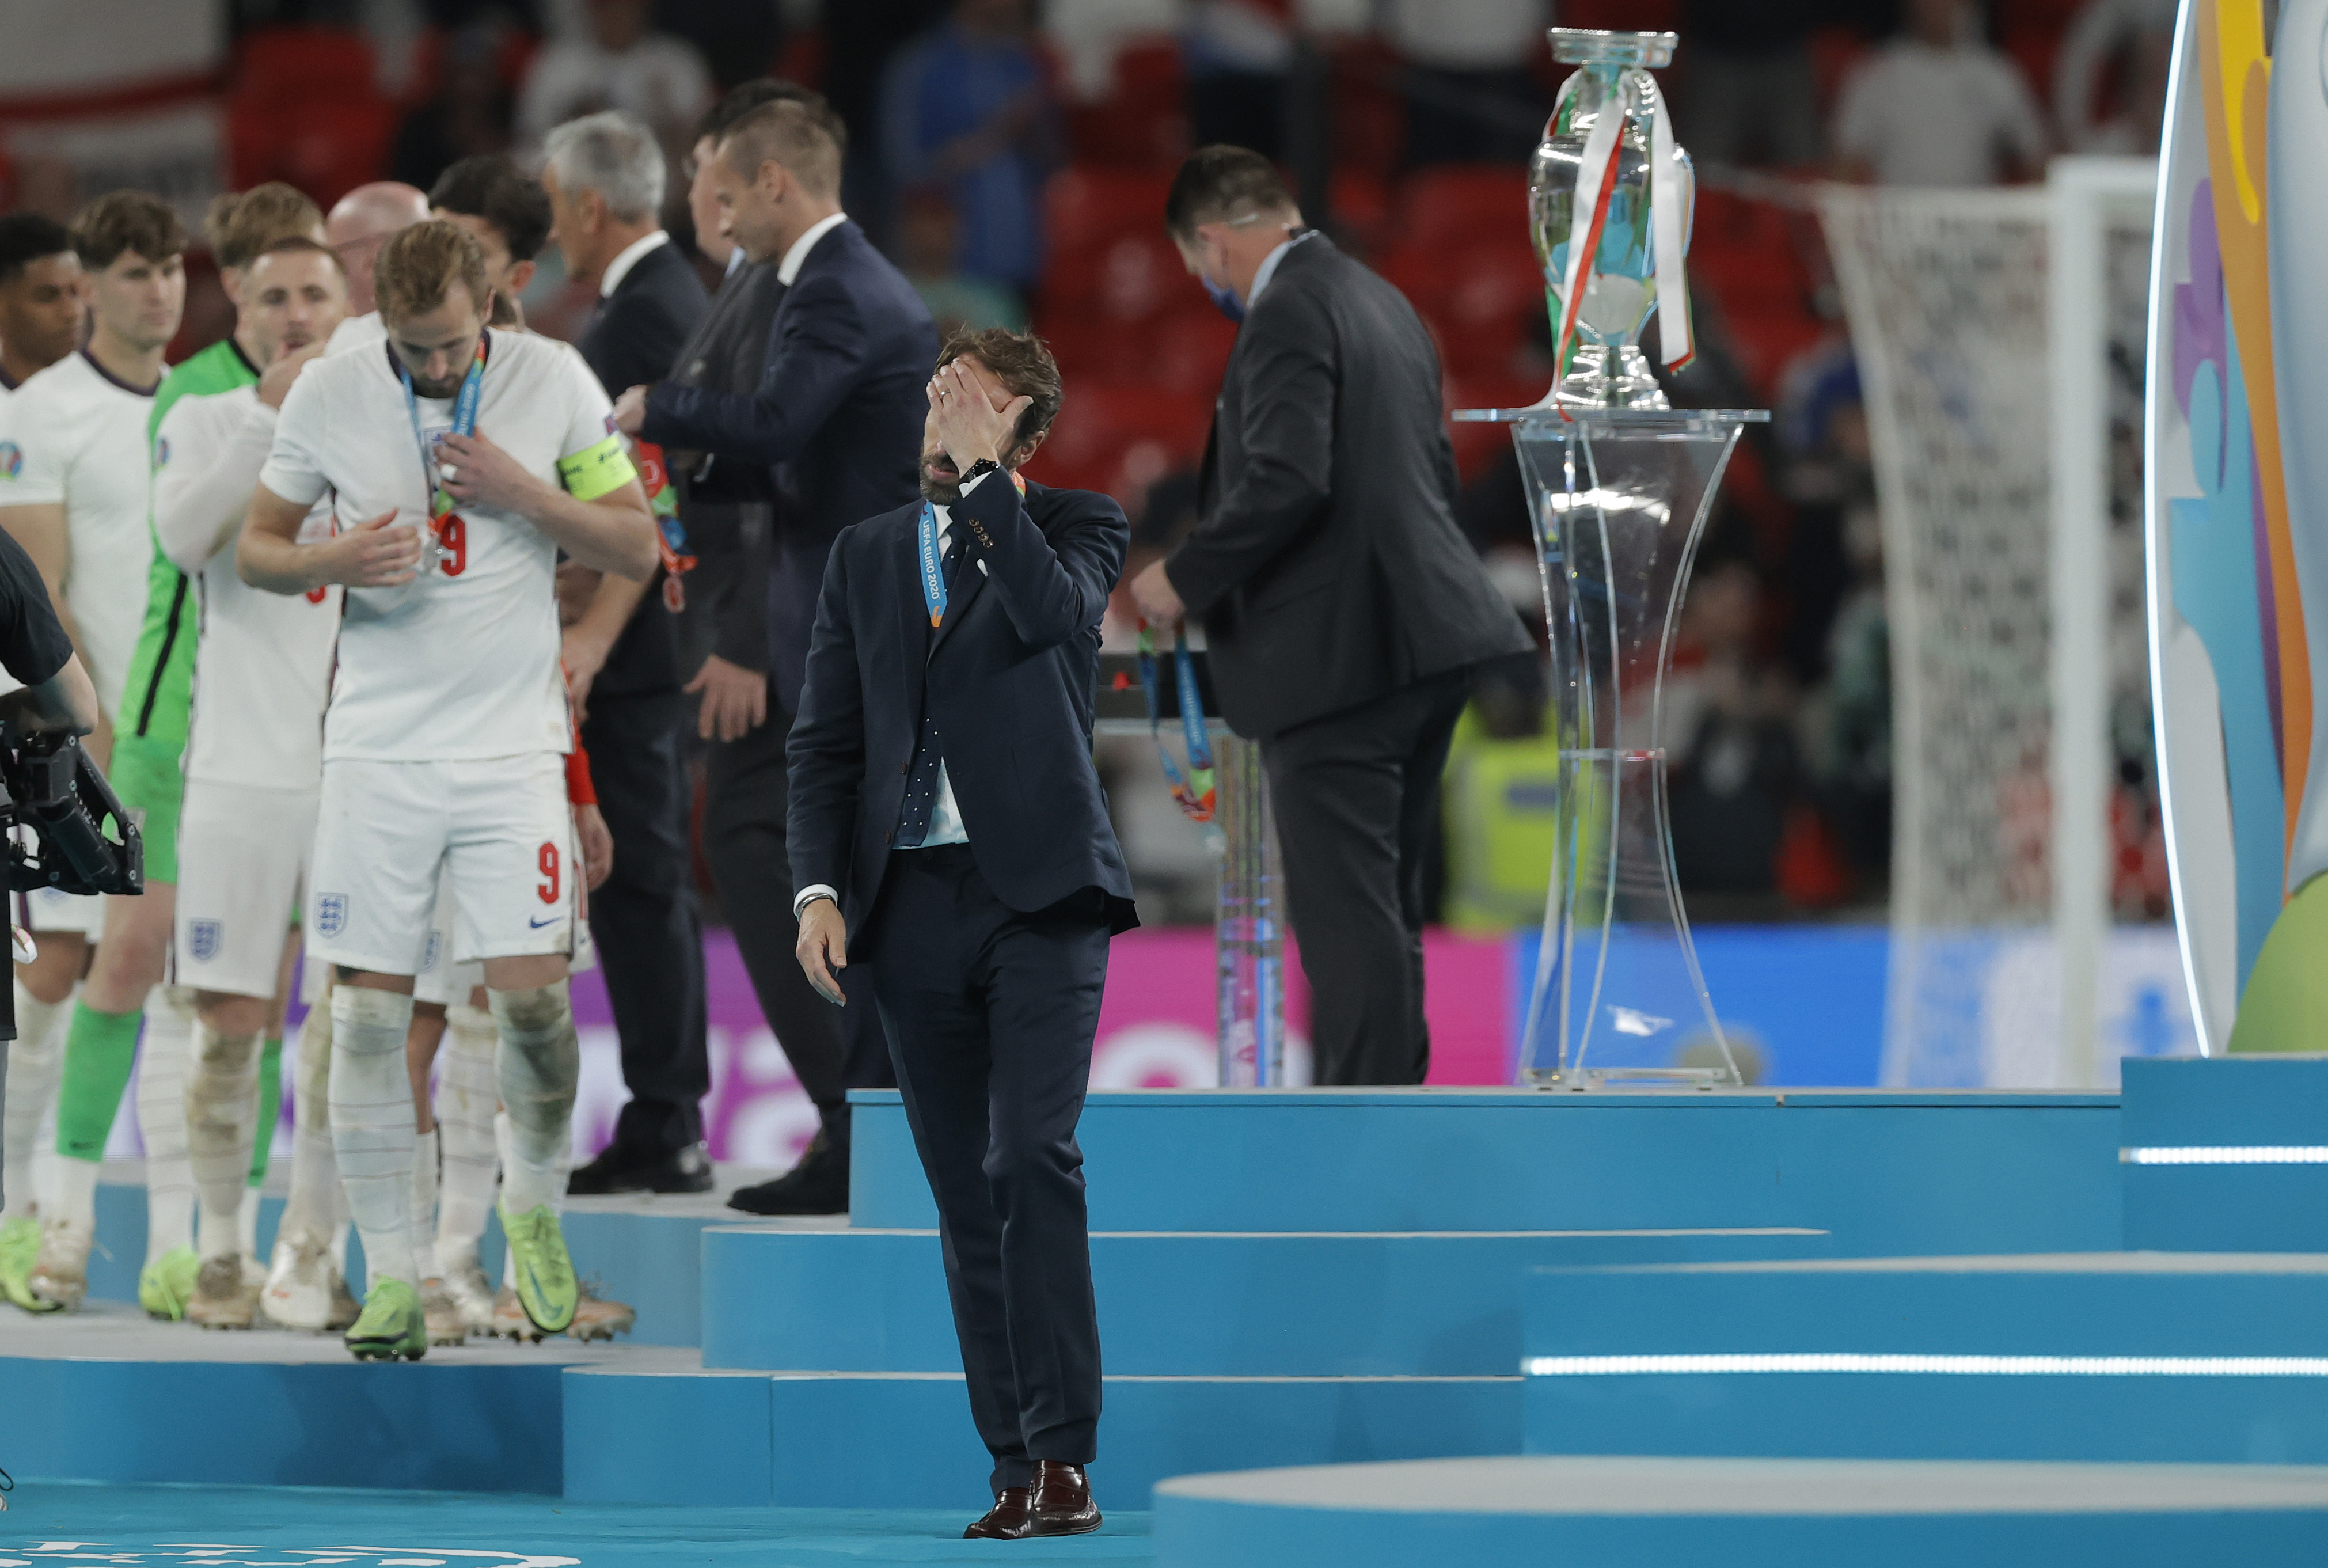 The England team and manager Gareth Southgate after the loss to Italy.